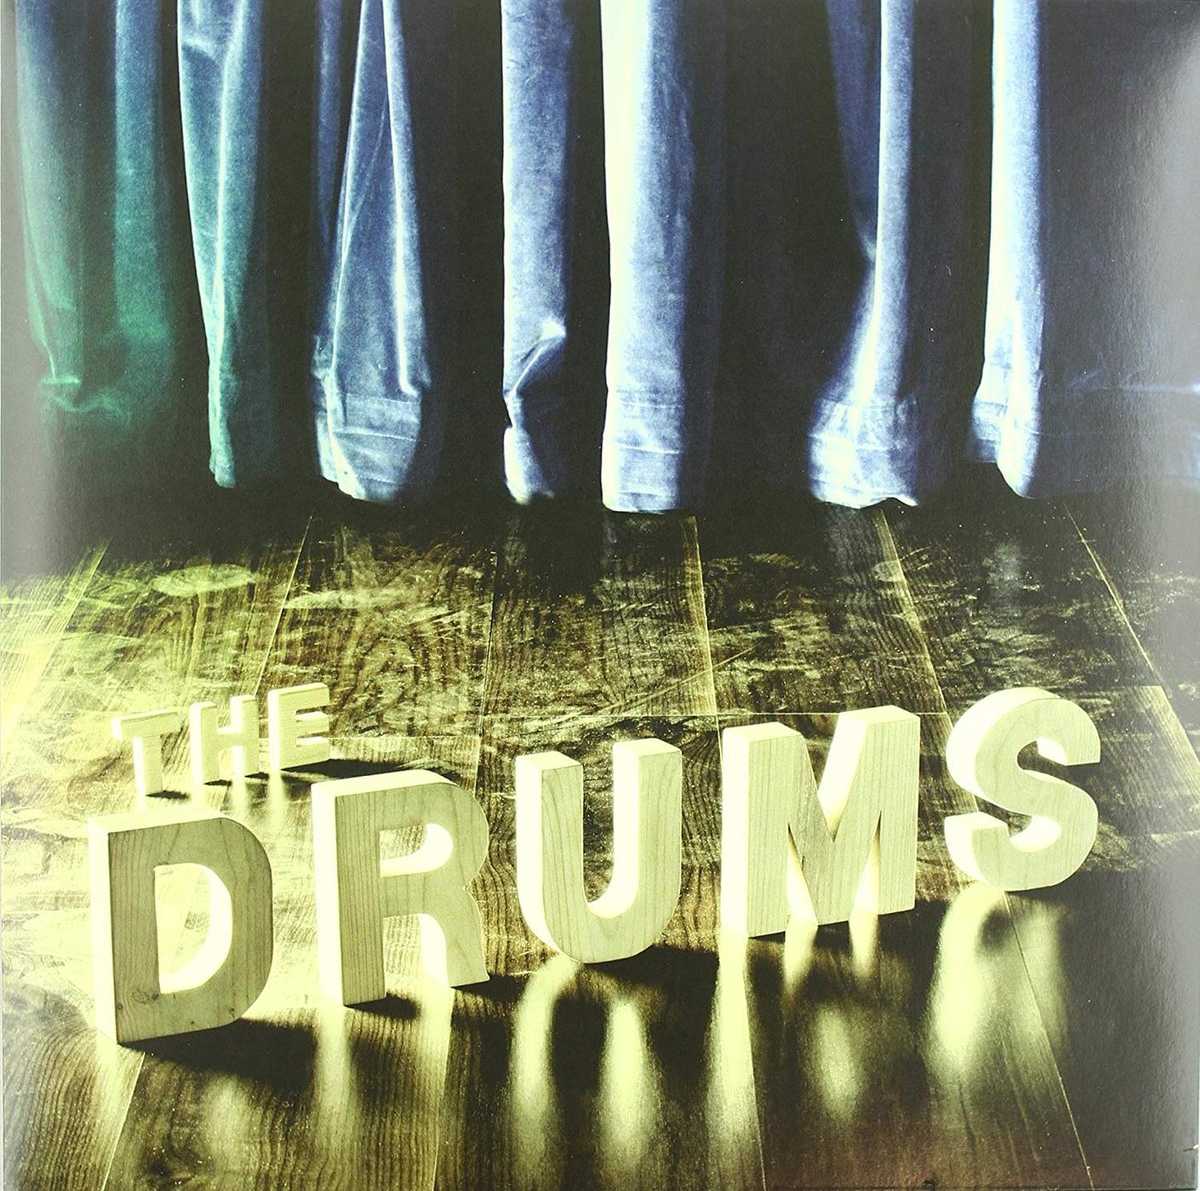 The Drums - Let’s go surfing